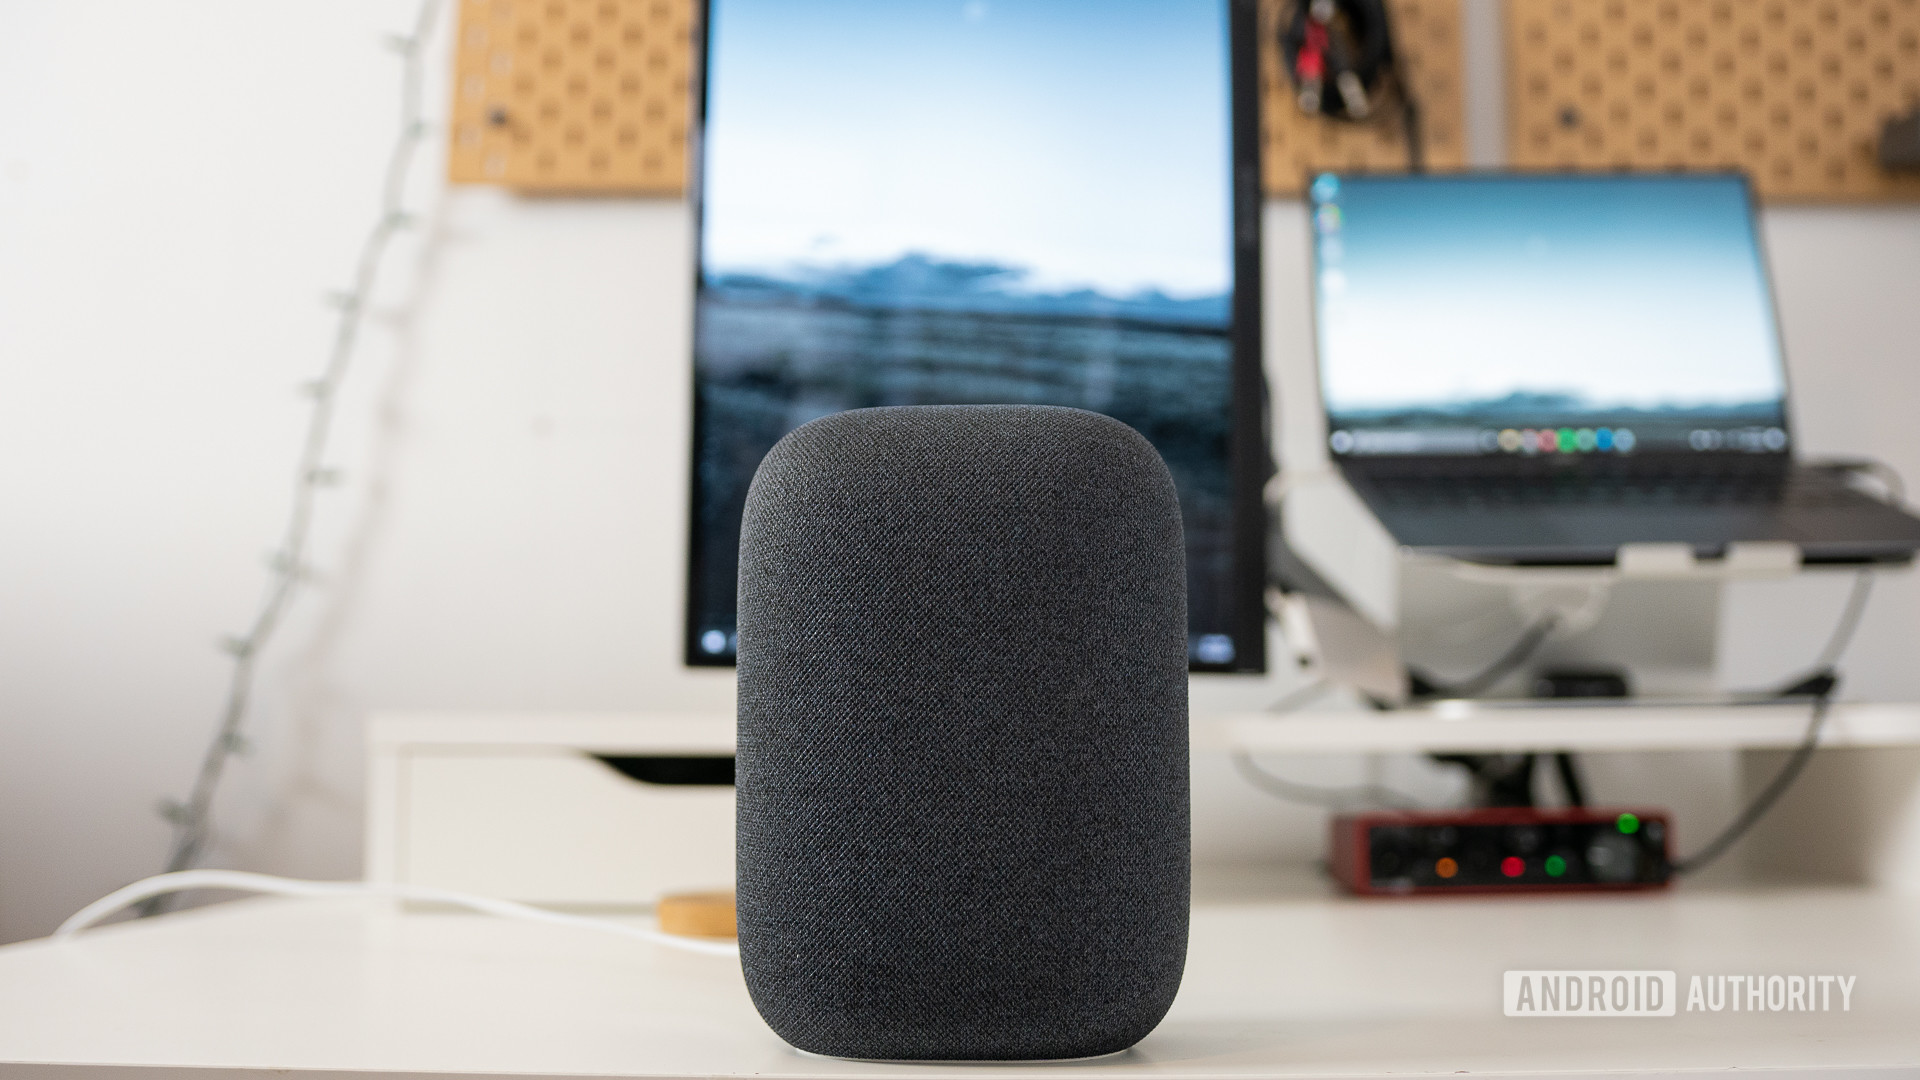 The gray Google Nest Audio speaker pictured on a white desk in front of computer screens. Headphone volume booster